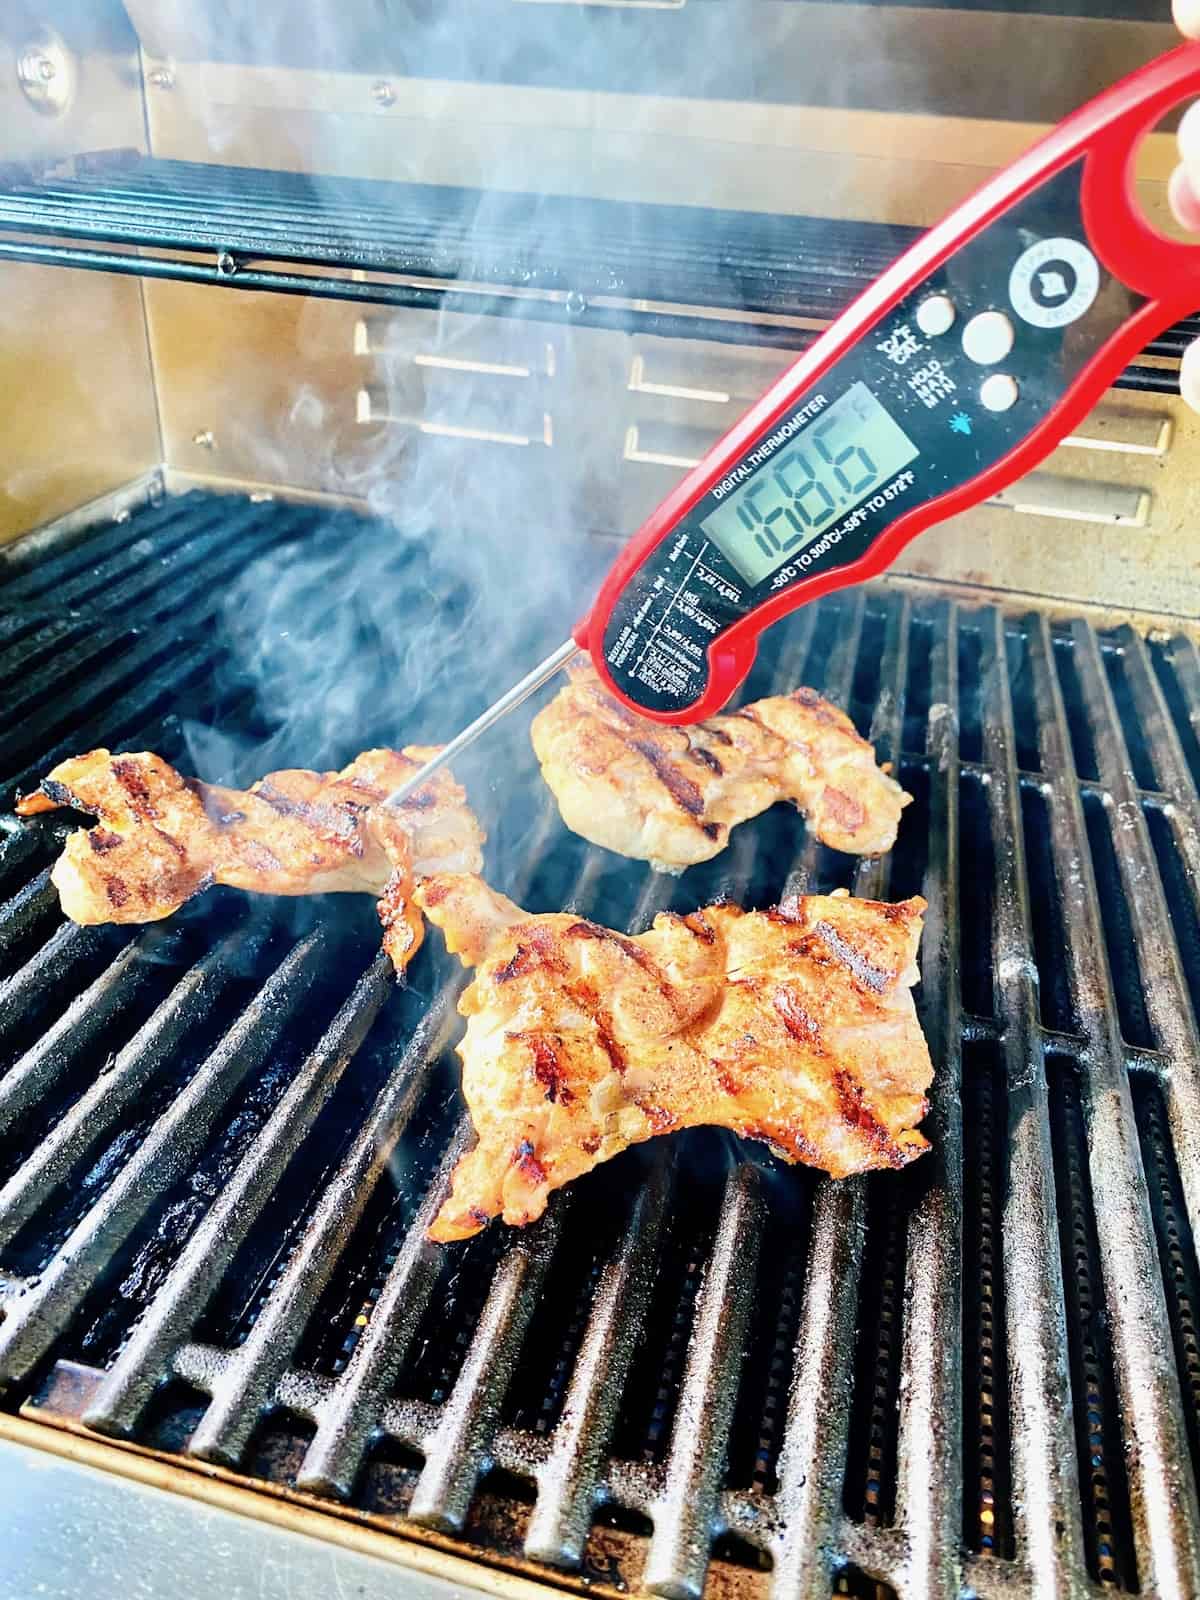 Quick read thermometer checking grilled chicken thighs.